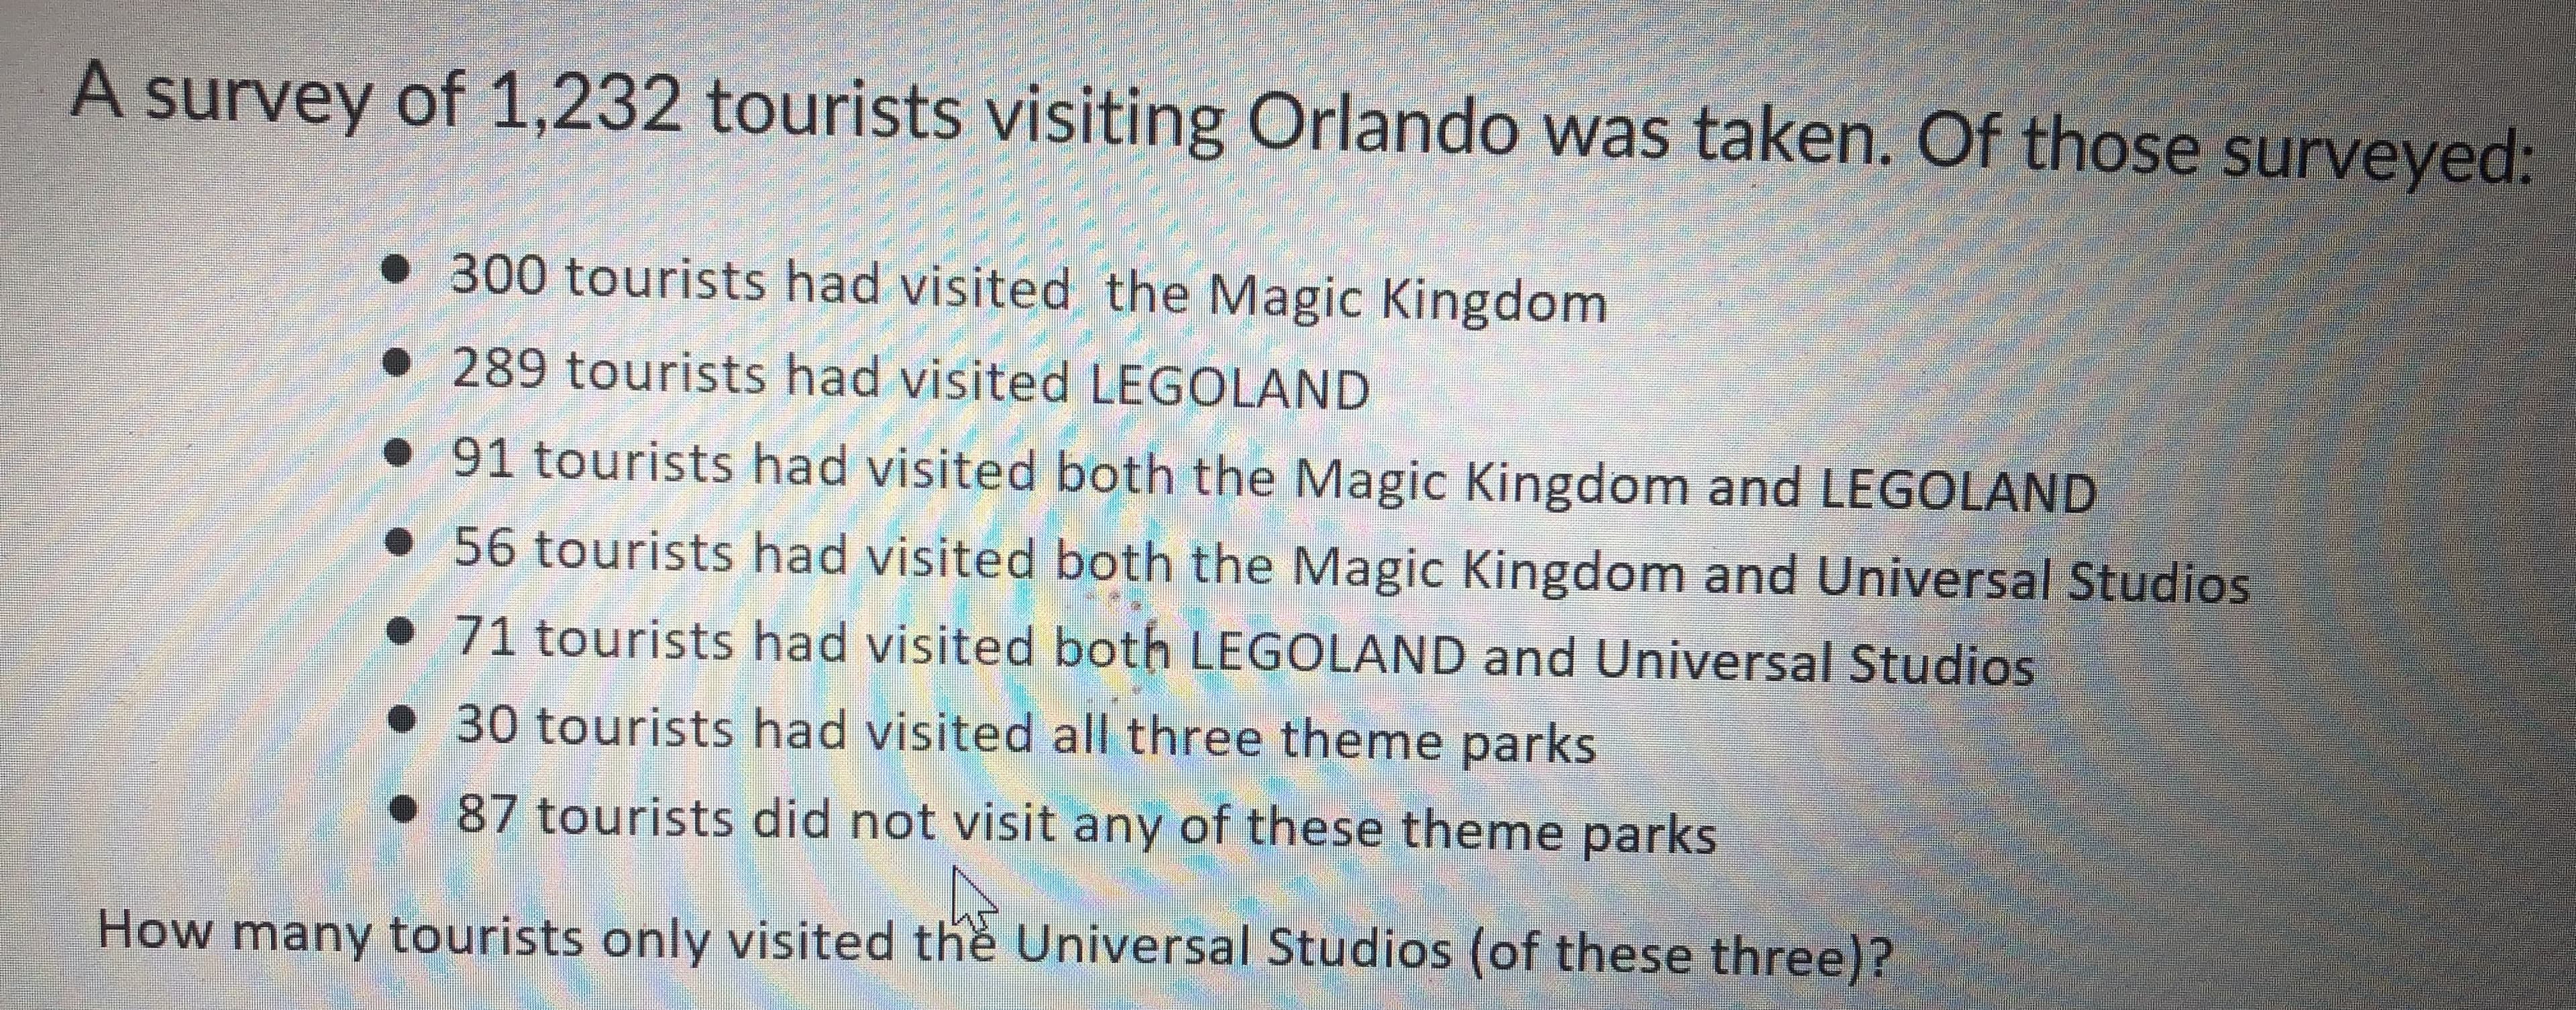 A survey of 1,232 tourists visiting Orlando was taken. Of those surveyed:
300 tourists had visited the Magic Kingdom
289 tourists had visited LEGOLAND
91 tourists had visited both the Magic Kingdom and LEGOLAND
56 tourists had visited both the Magic Kingdom and Universal Studios
had visited both LEGOLAND and Universal Studios
71 tourists
30 tourists had visited all three theme parks
87 tourists did not visit any of these theme parks
How many tourists only visited the Universal Studios (of these three)?
